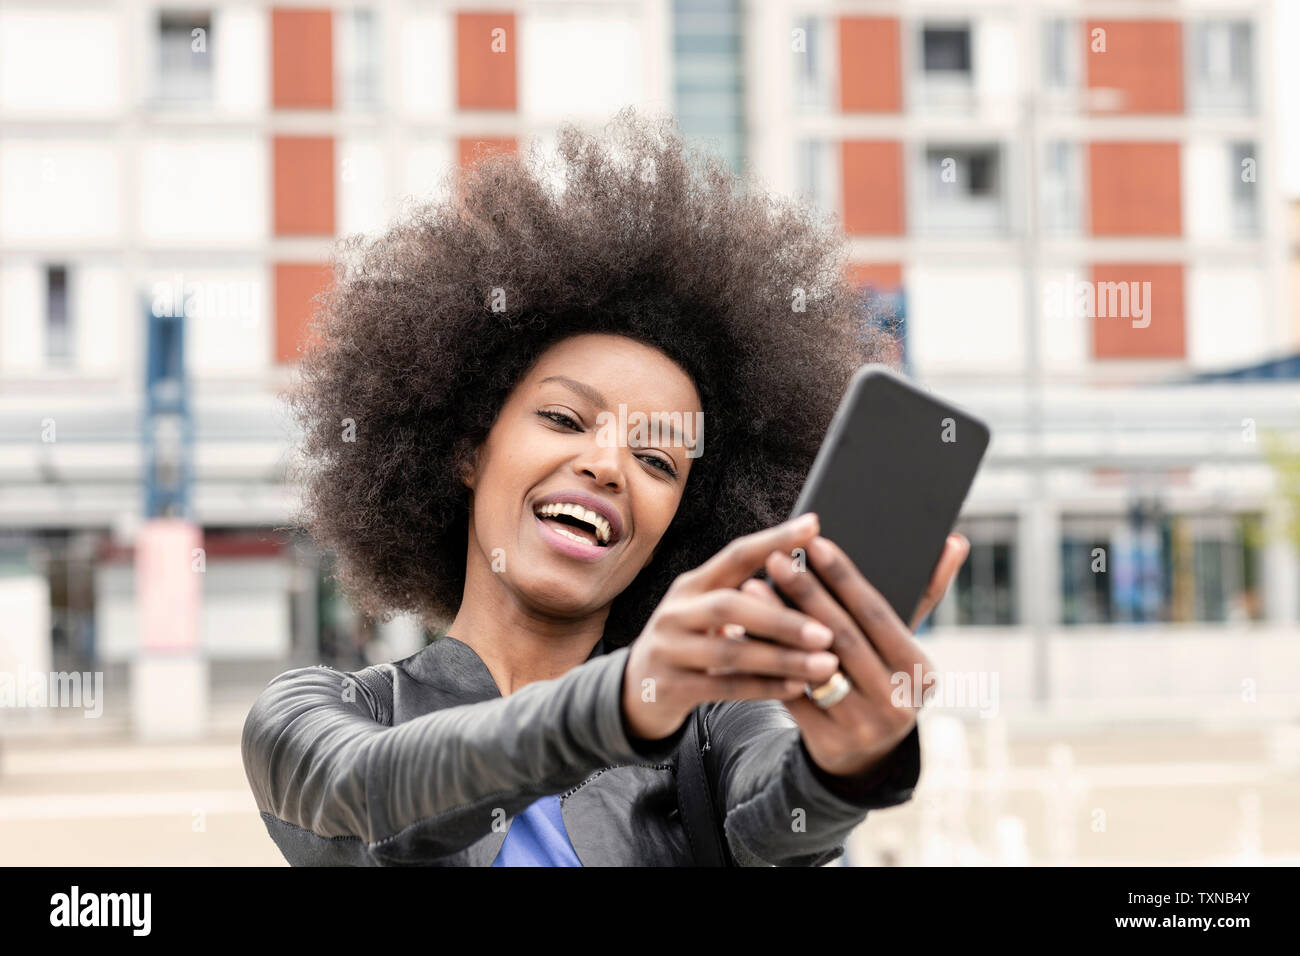 Happy young woman with afro hair in city, taking smartphone selfie Stock Photo